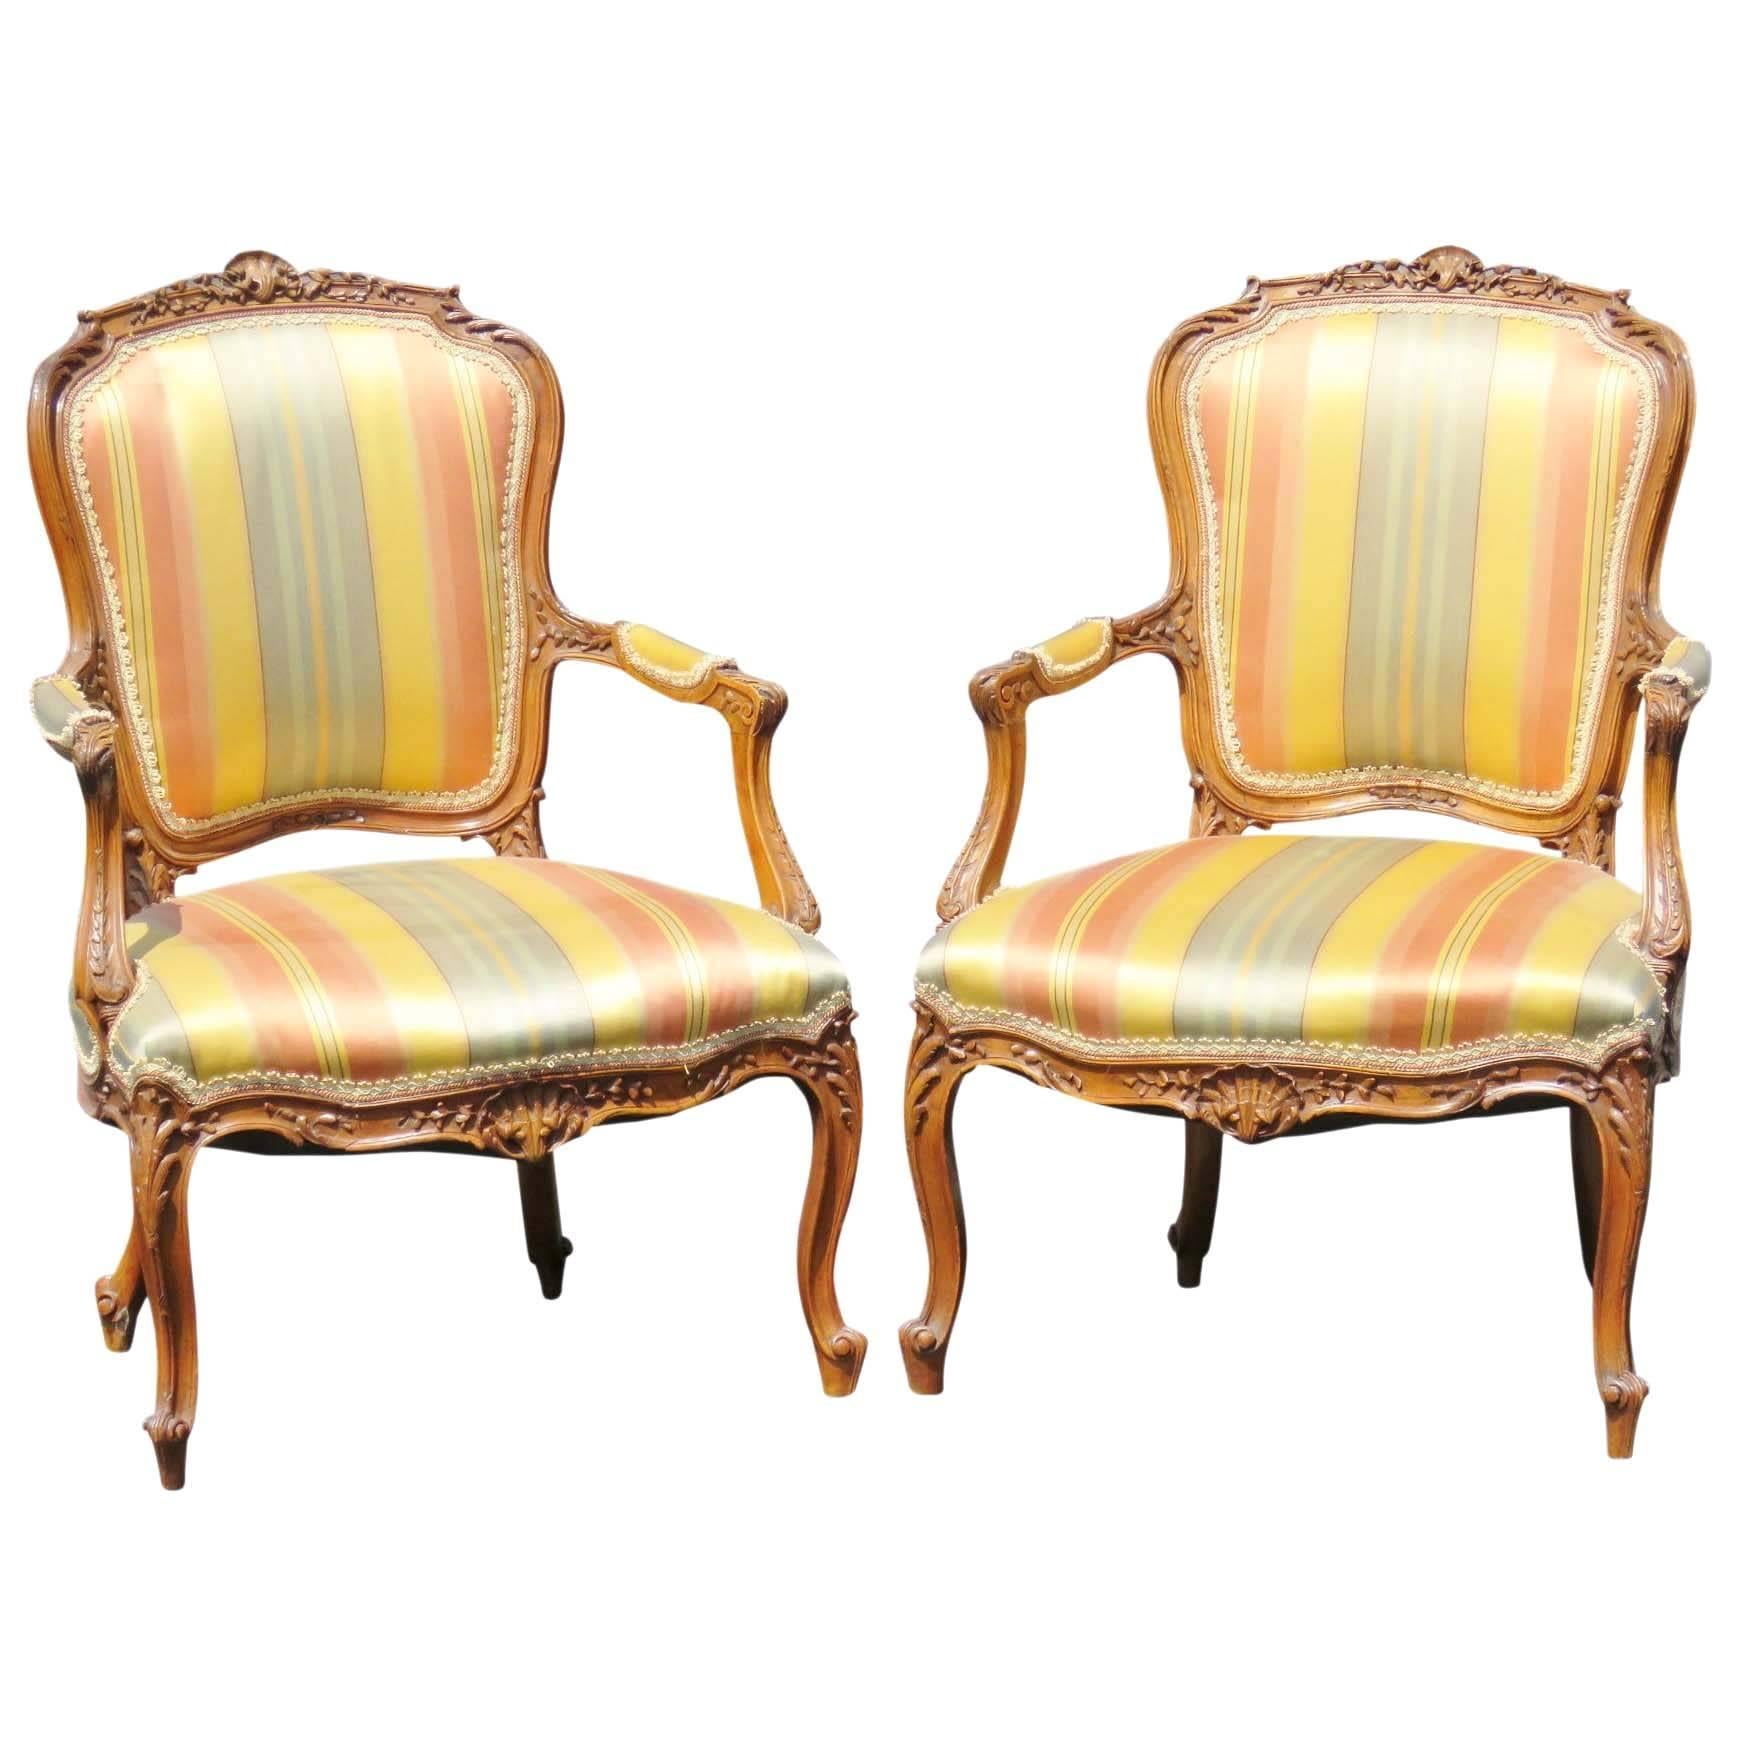 Pair of Louis XVI Style Carved Walnut Fauteuils Arm Chairs